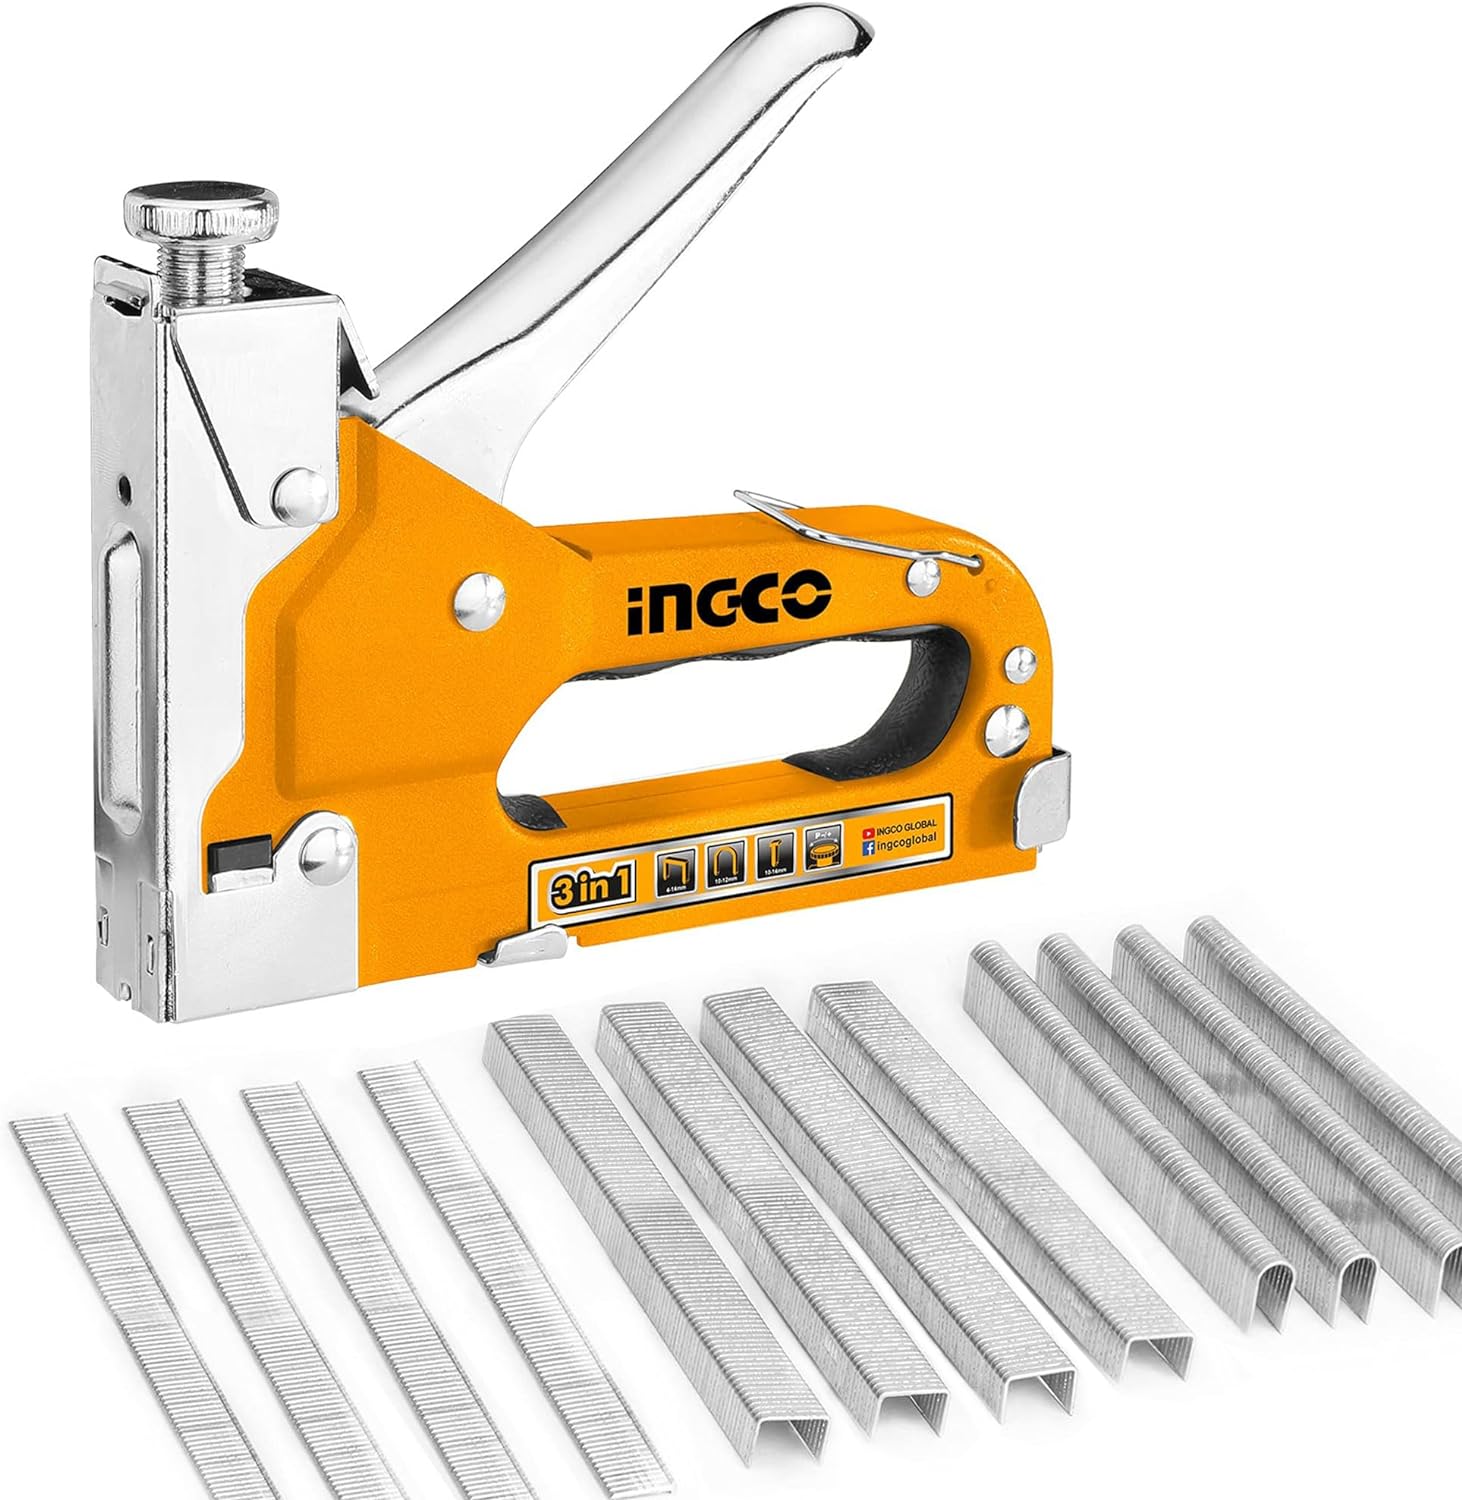 INGCO 3 in 1 Stapler with Staples Pins